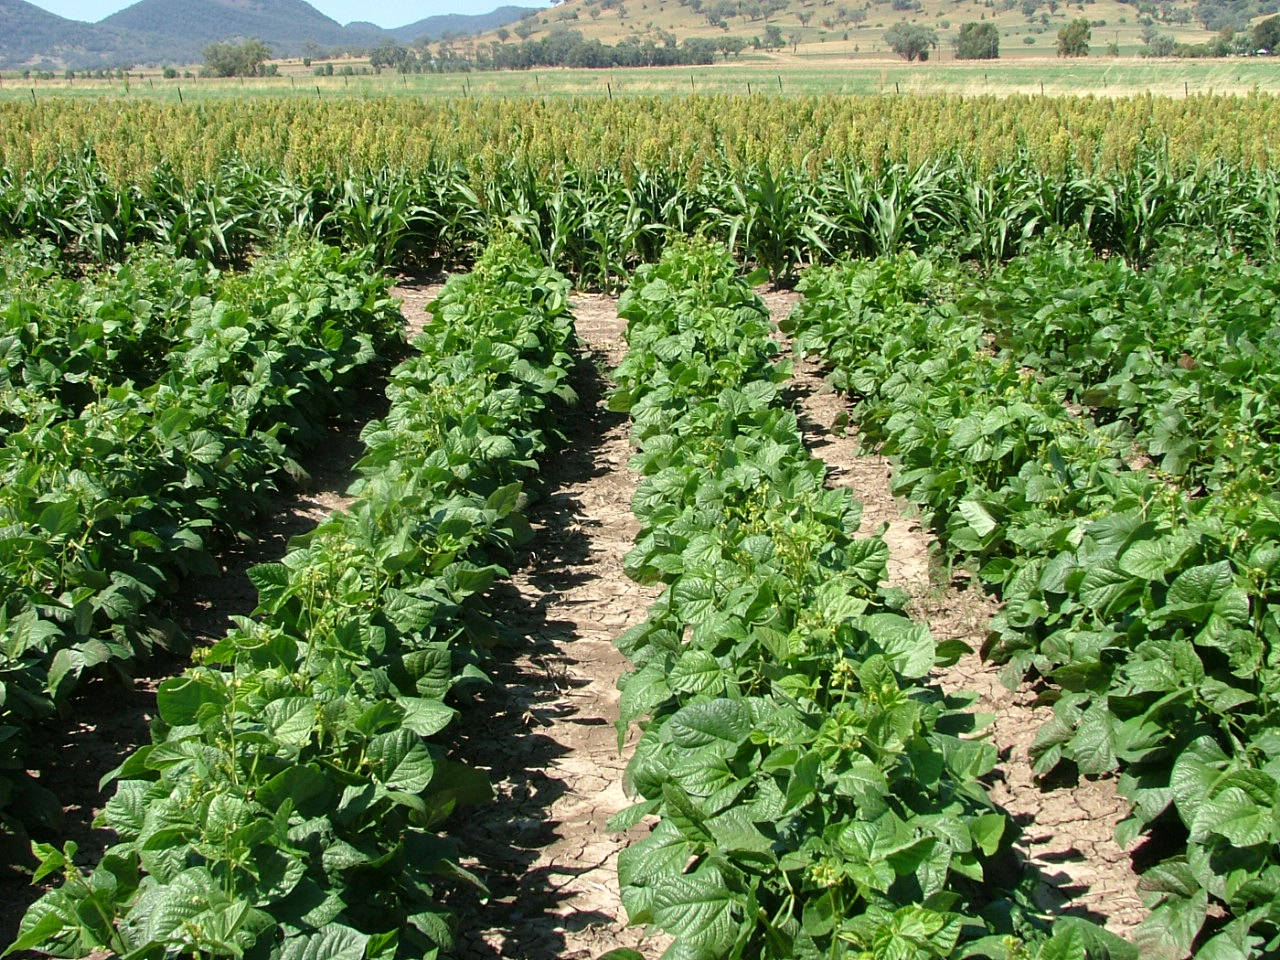 Field of mungbeans being grown in summer trial